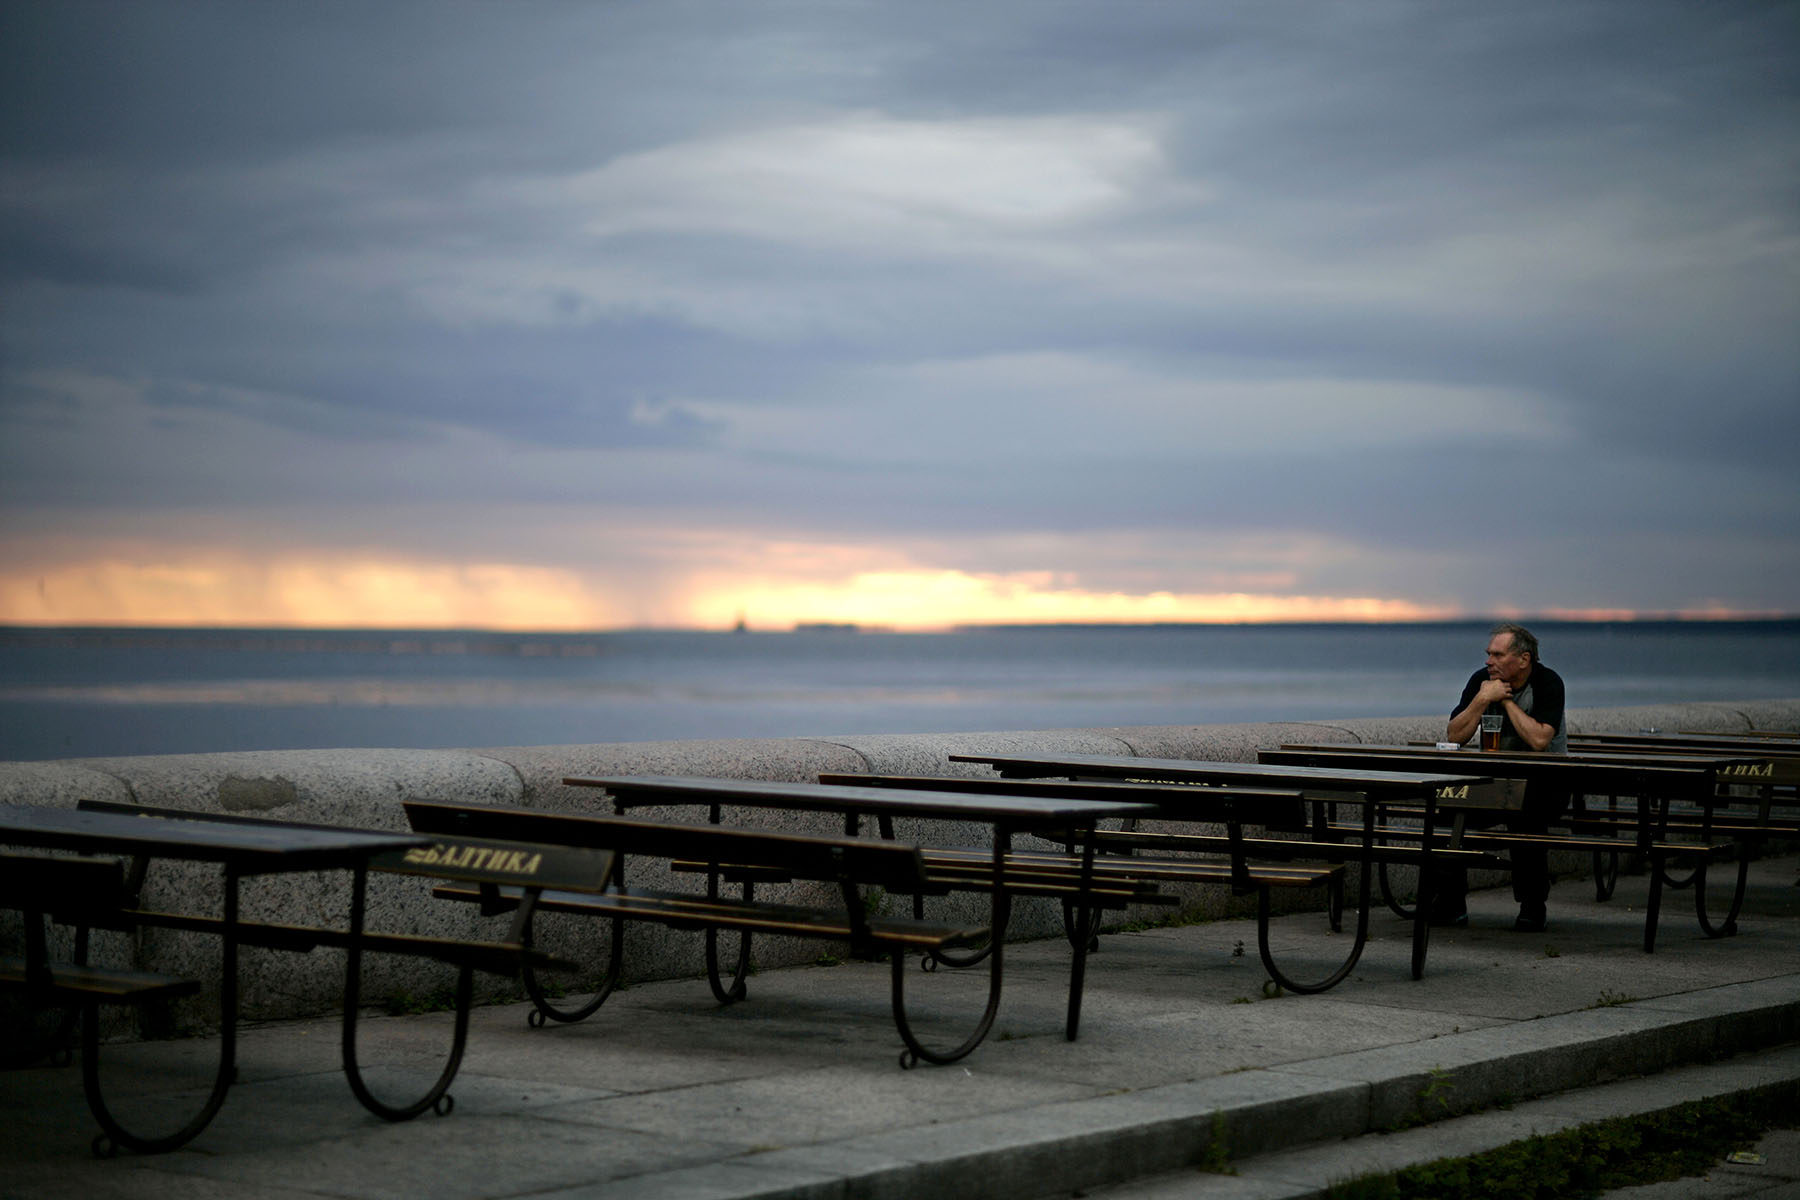 A man drinks a beer at a cafe along the Gulf of Finland in St. Petersburg, Russia, July 17, 2006.Photo by Brooks Kraft/Corbis